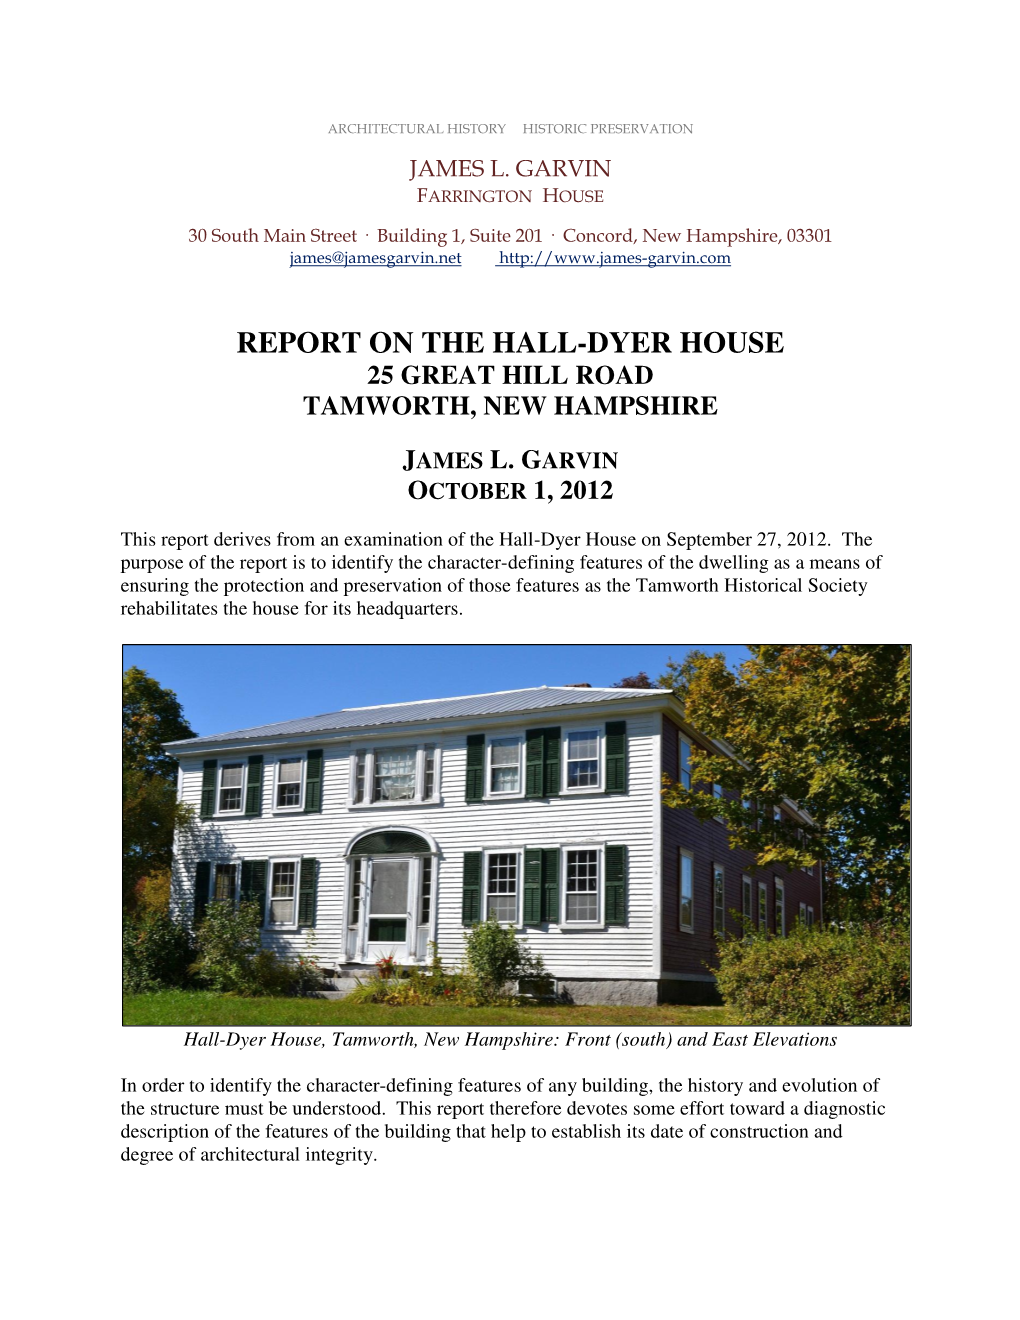 Report on the Hall-Dyer House 25 Great Hill Road Tamworth, New Hampshire